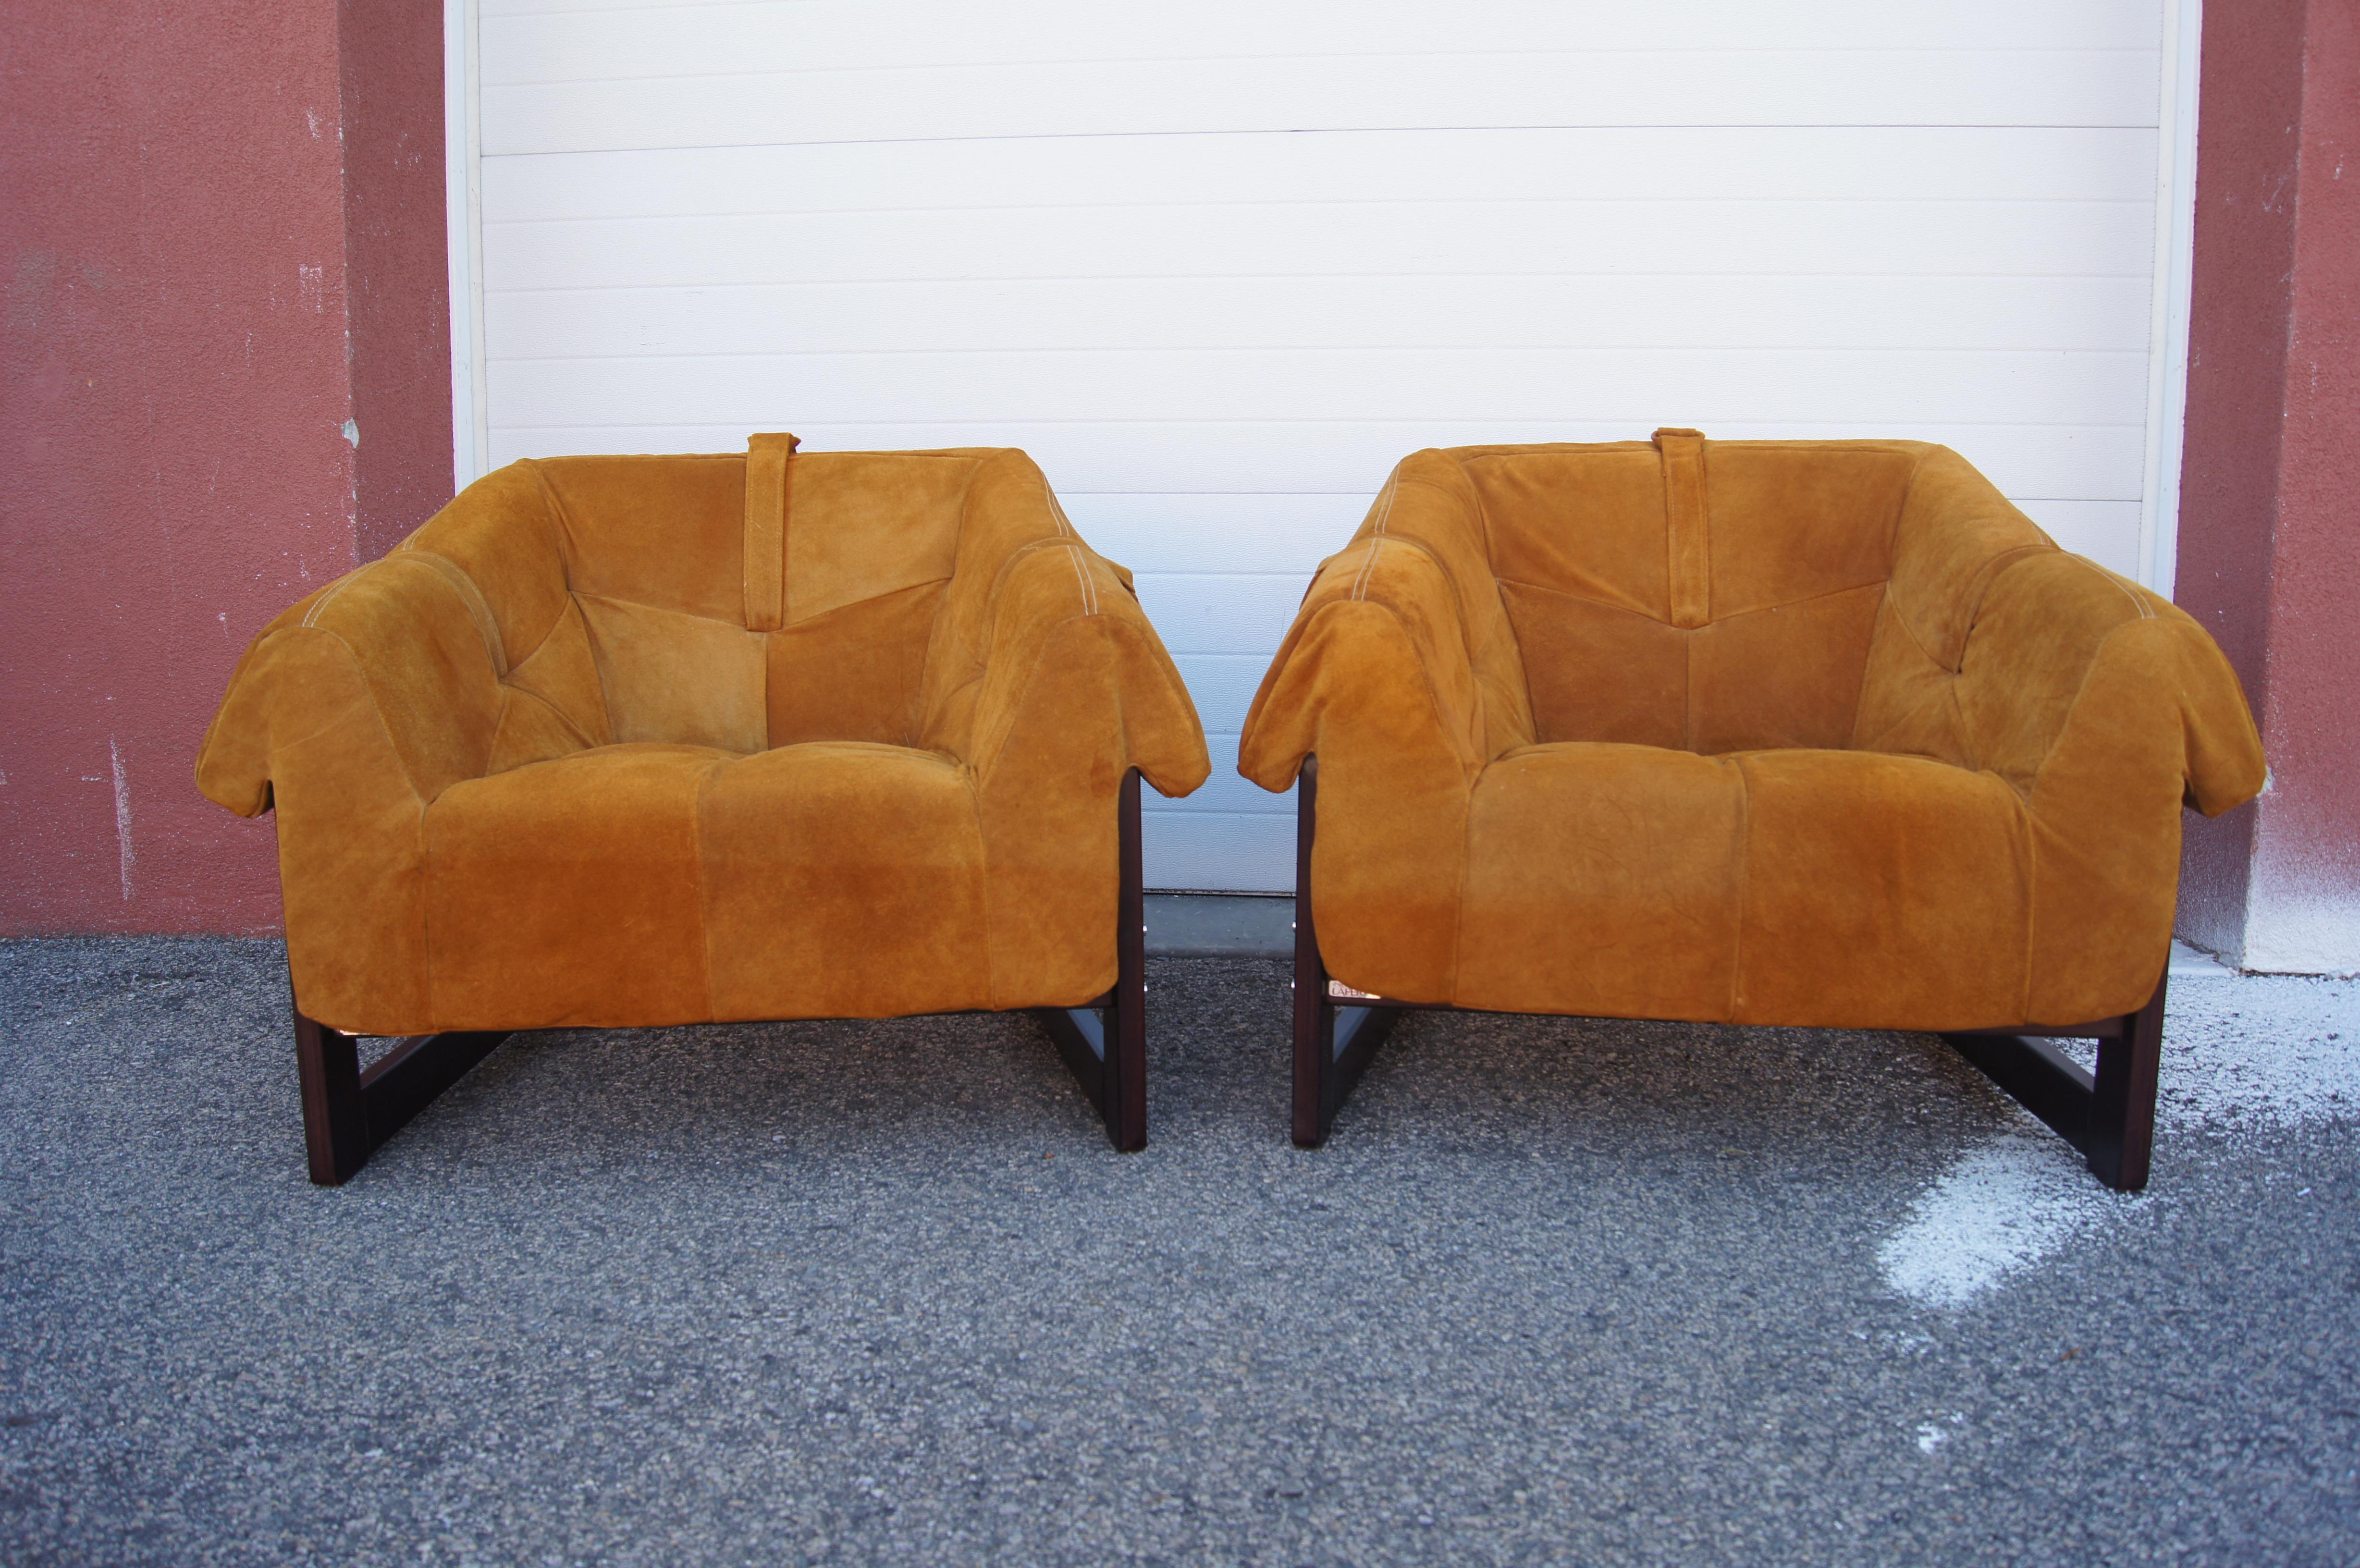 Brazilian modernist Percival Lafer designed this inviting pair of lounge chairs as part of his MP-091 suite. The comfortable tufted cushions sit on sturdy straps, attached with dowels to the lower front and upper back of the sloping jacaranda